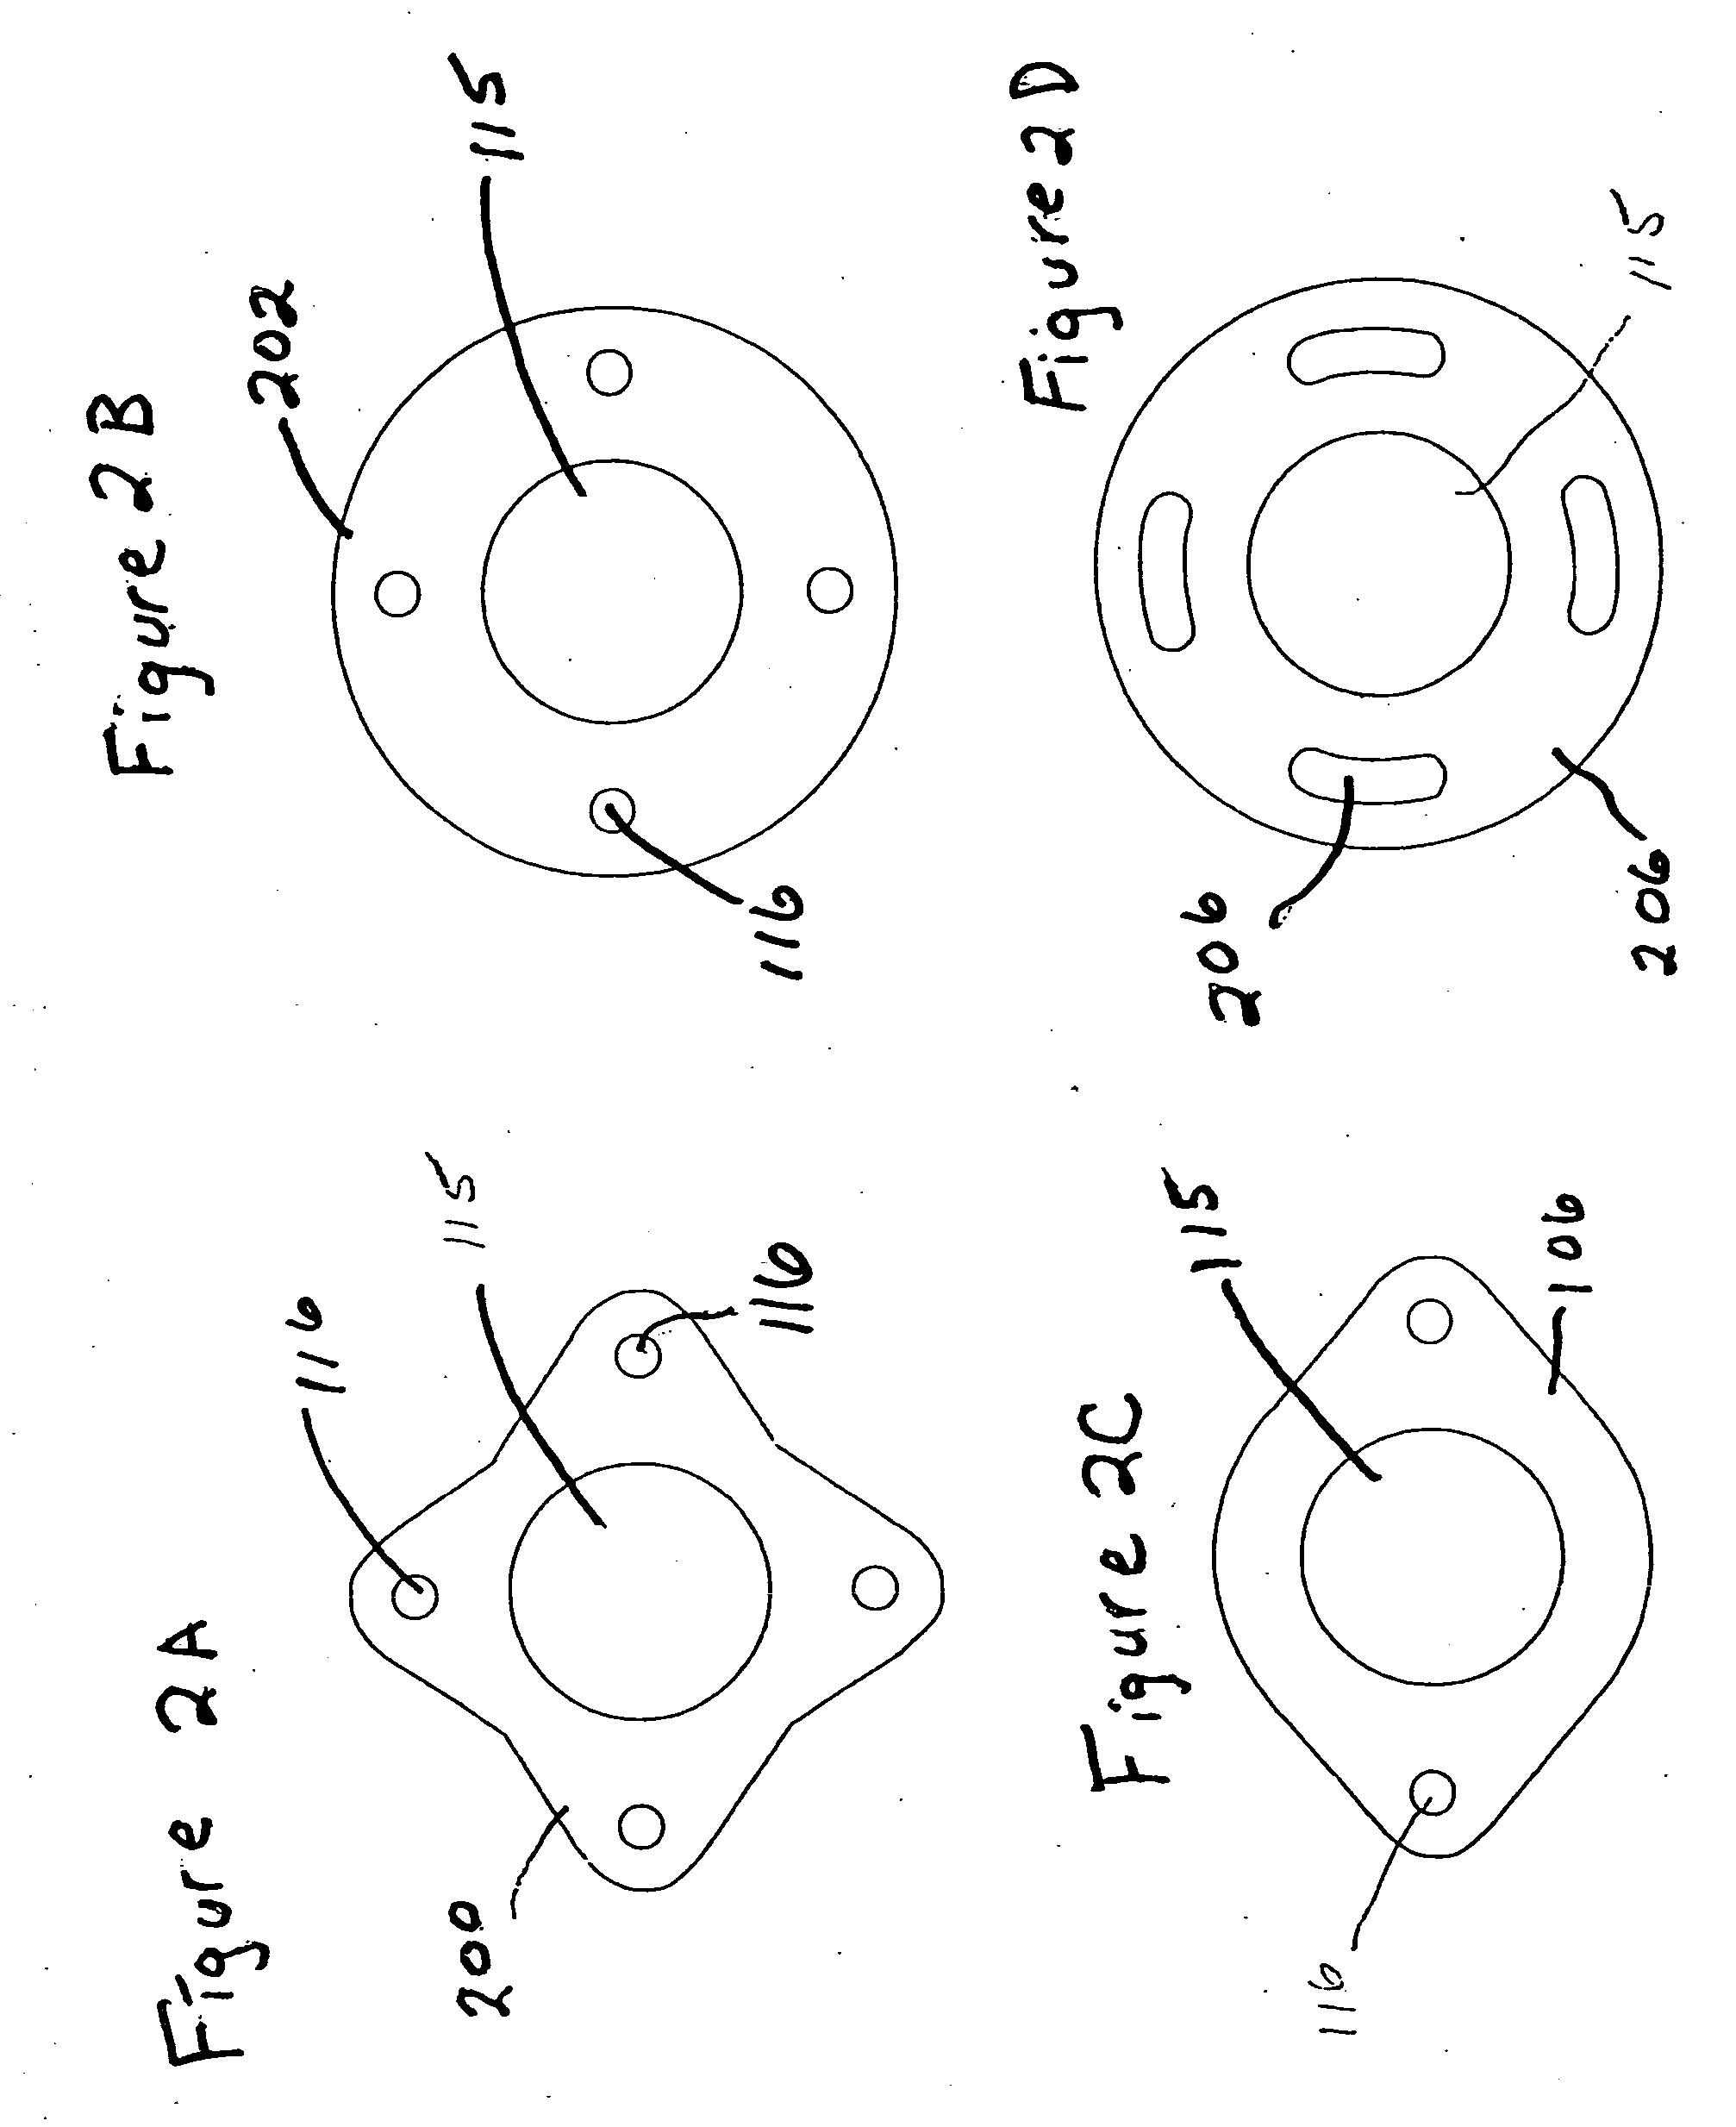 Isolation valve with rotatable flange